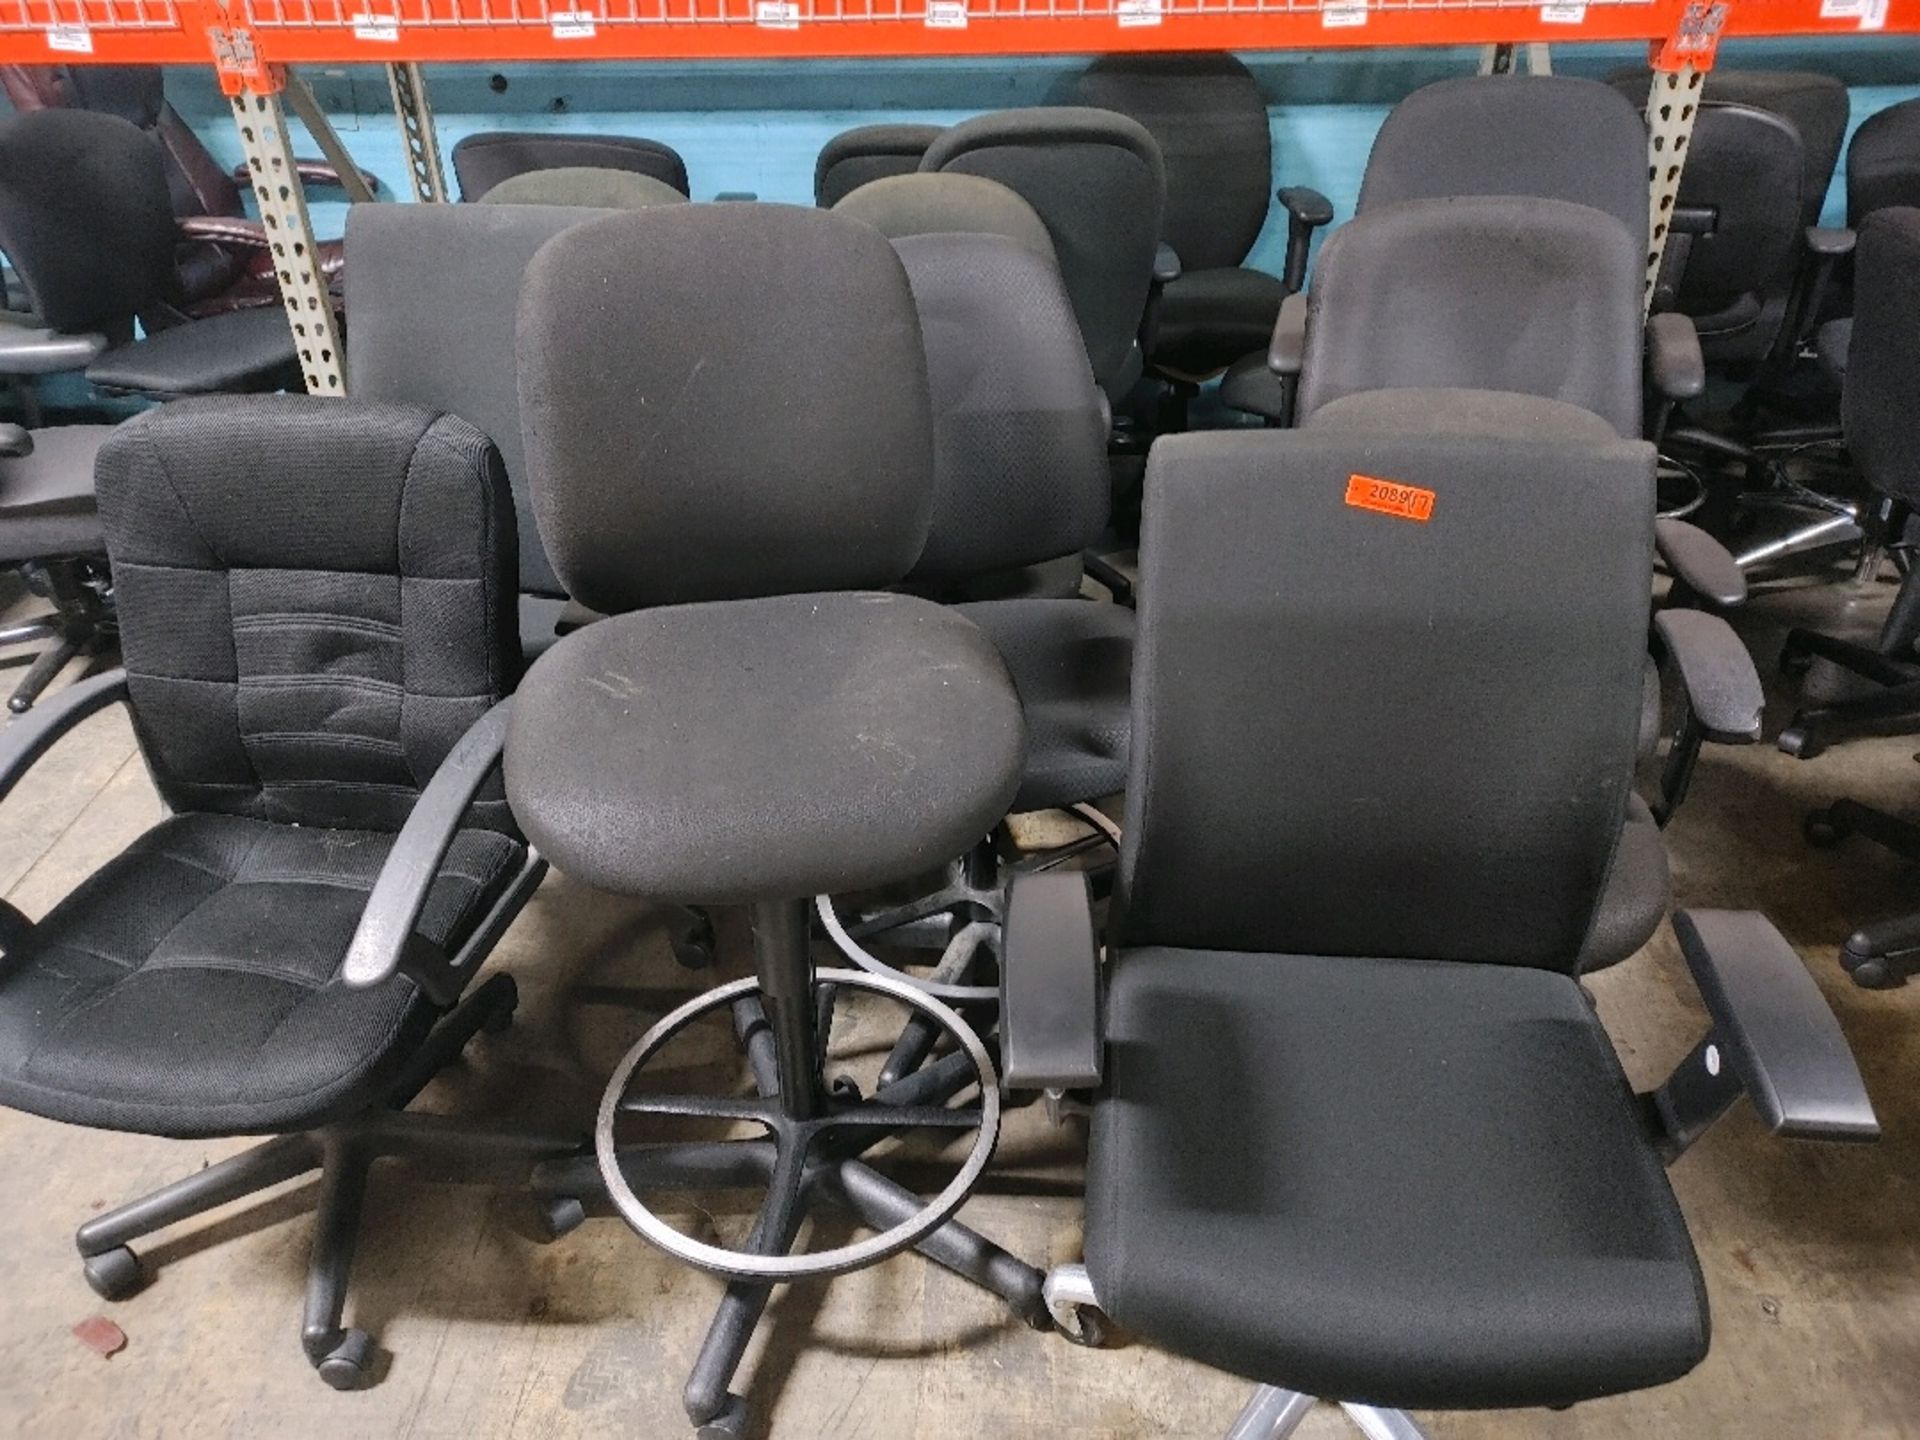 VARIOUS TASK OFFICE CHAIRS ON WHEELS QTY: 17, LOCATED: 3821 N. FRATNEY STREET MILWAUKEE, WI 53212